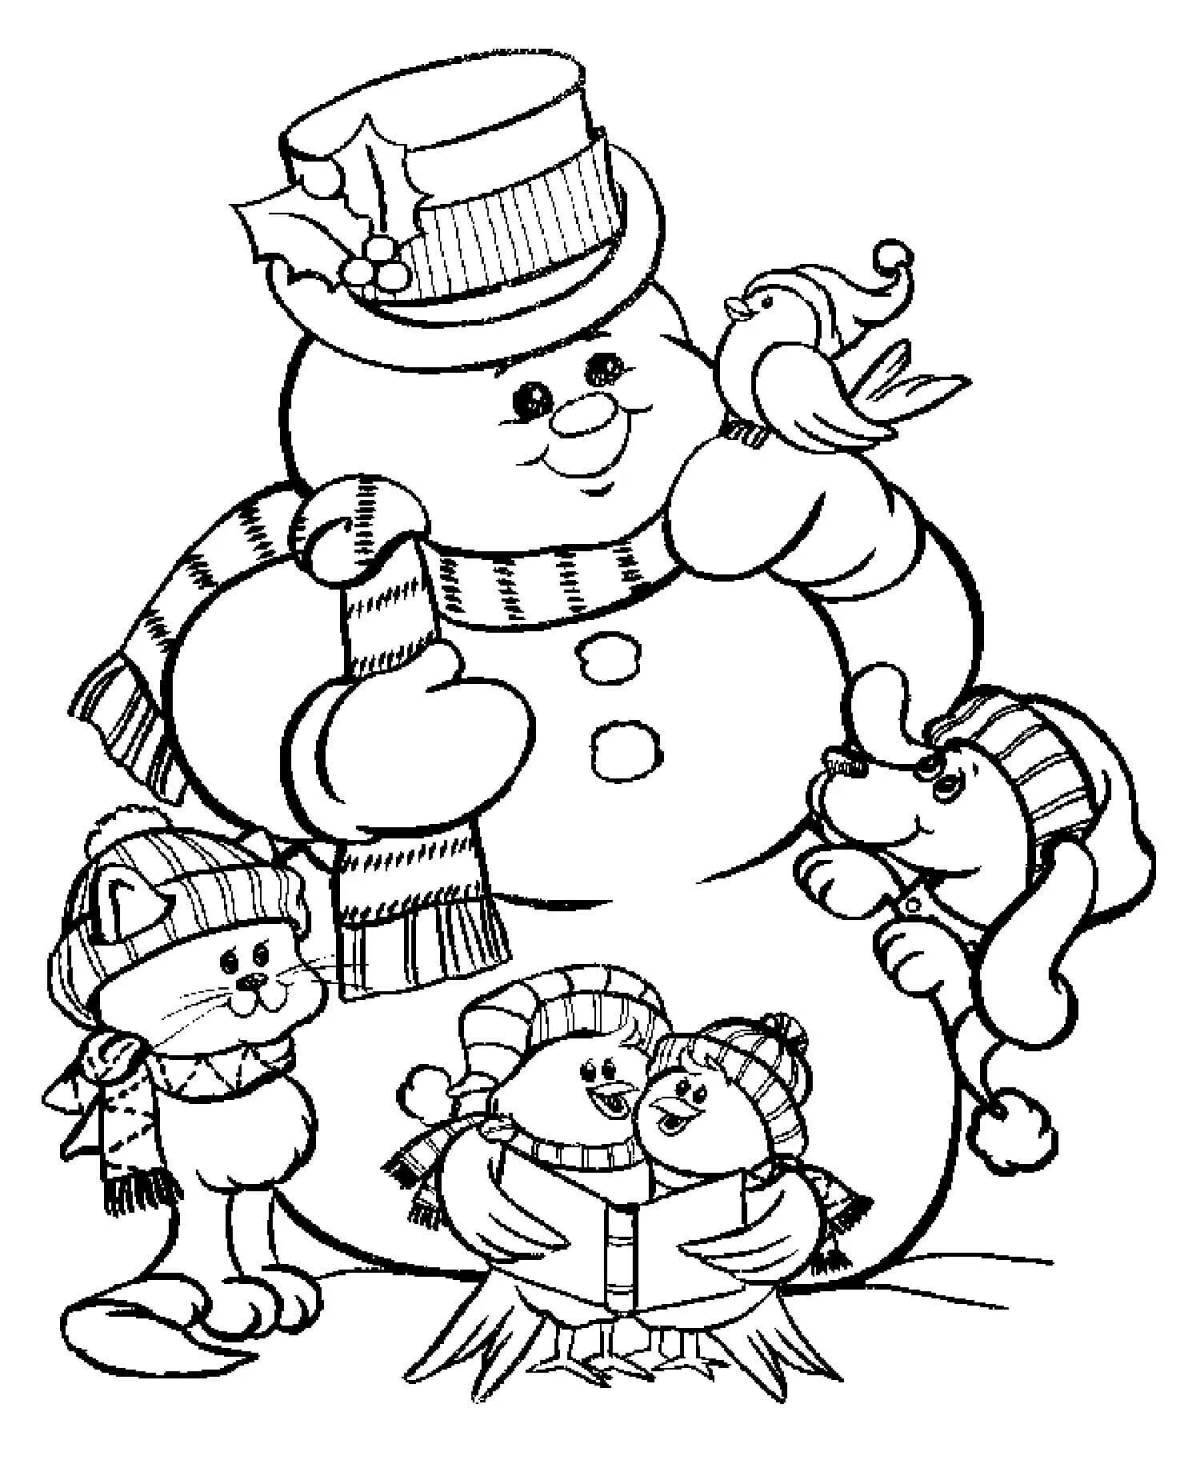 Exquisite children's Christmas coloring book